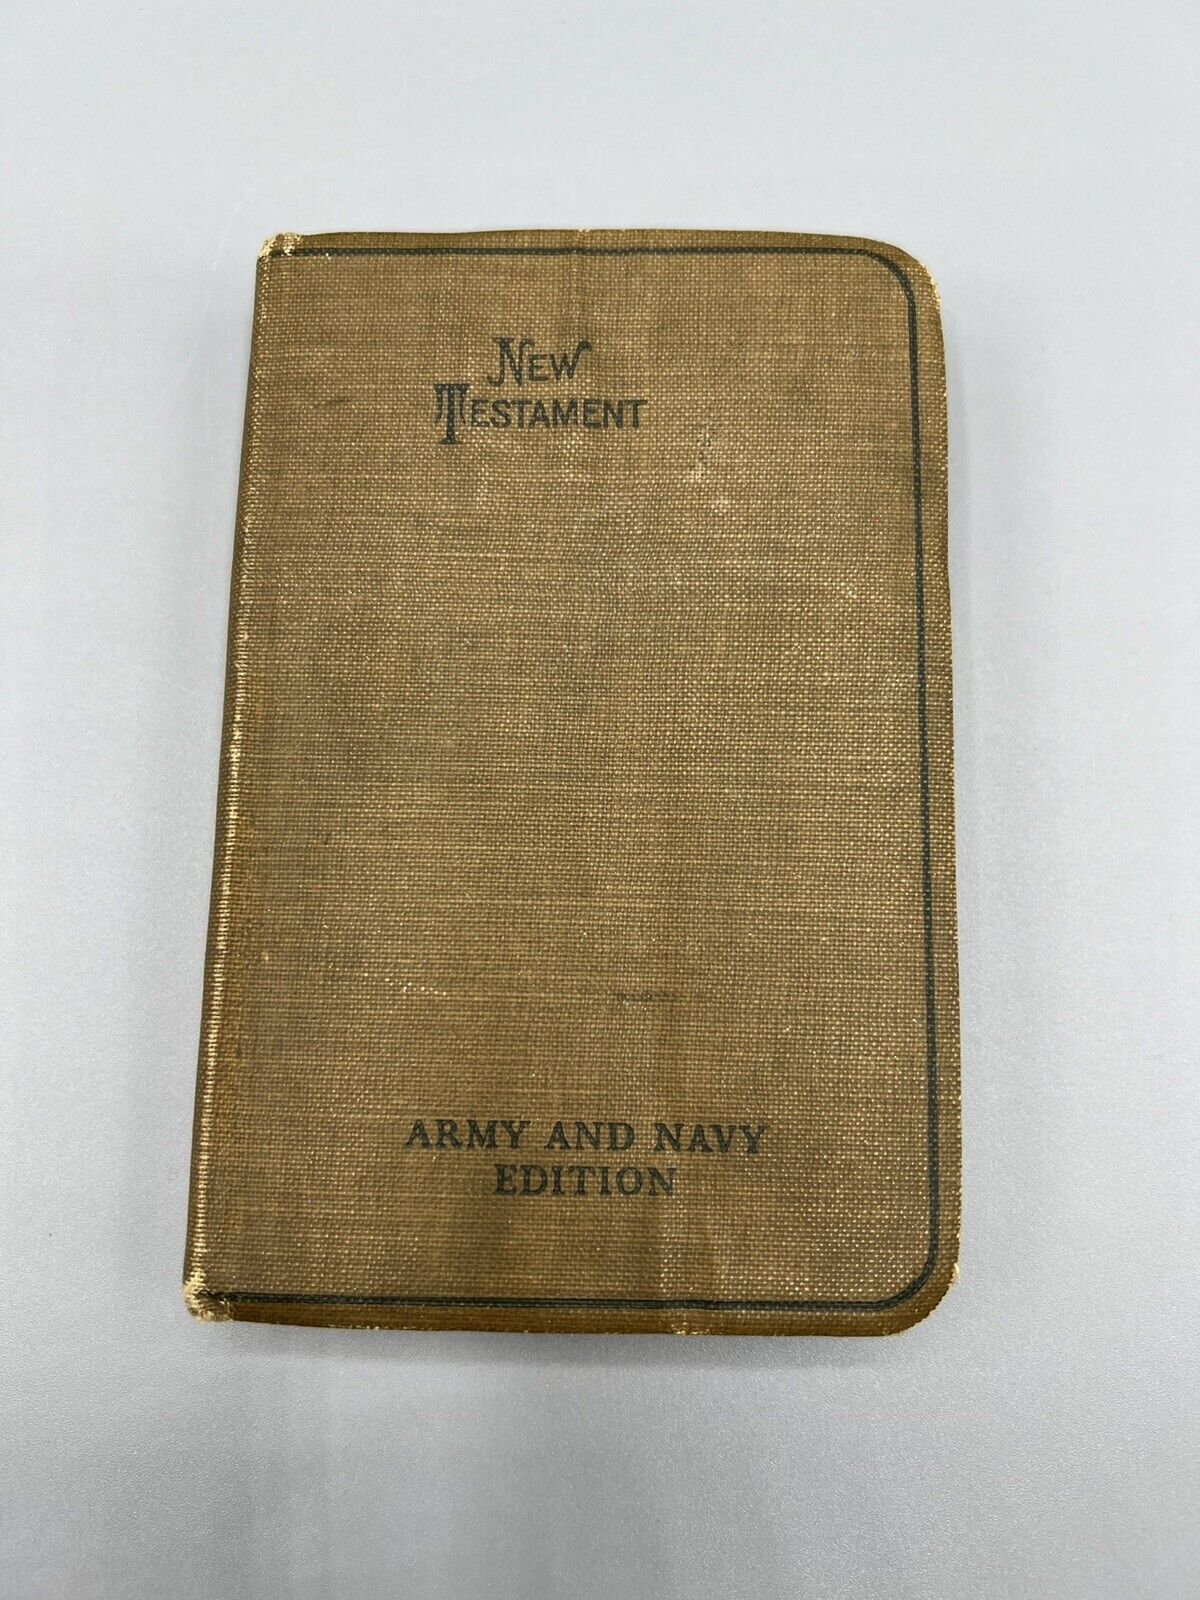 Antique 1917 WWI New Testament Pocket Bible U.S. ARMY and NAVY EDITION - CLEAN